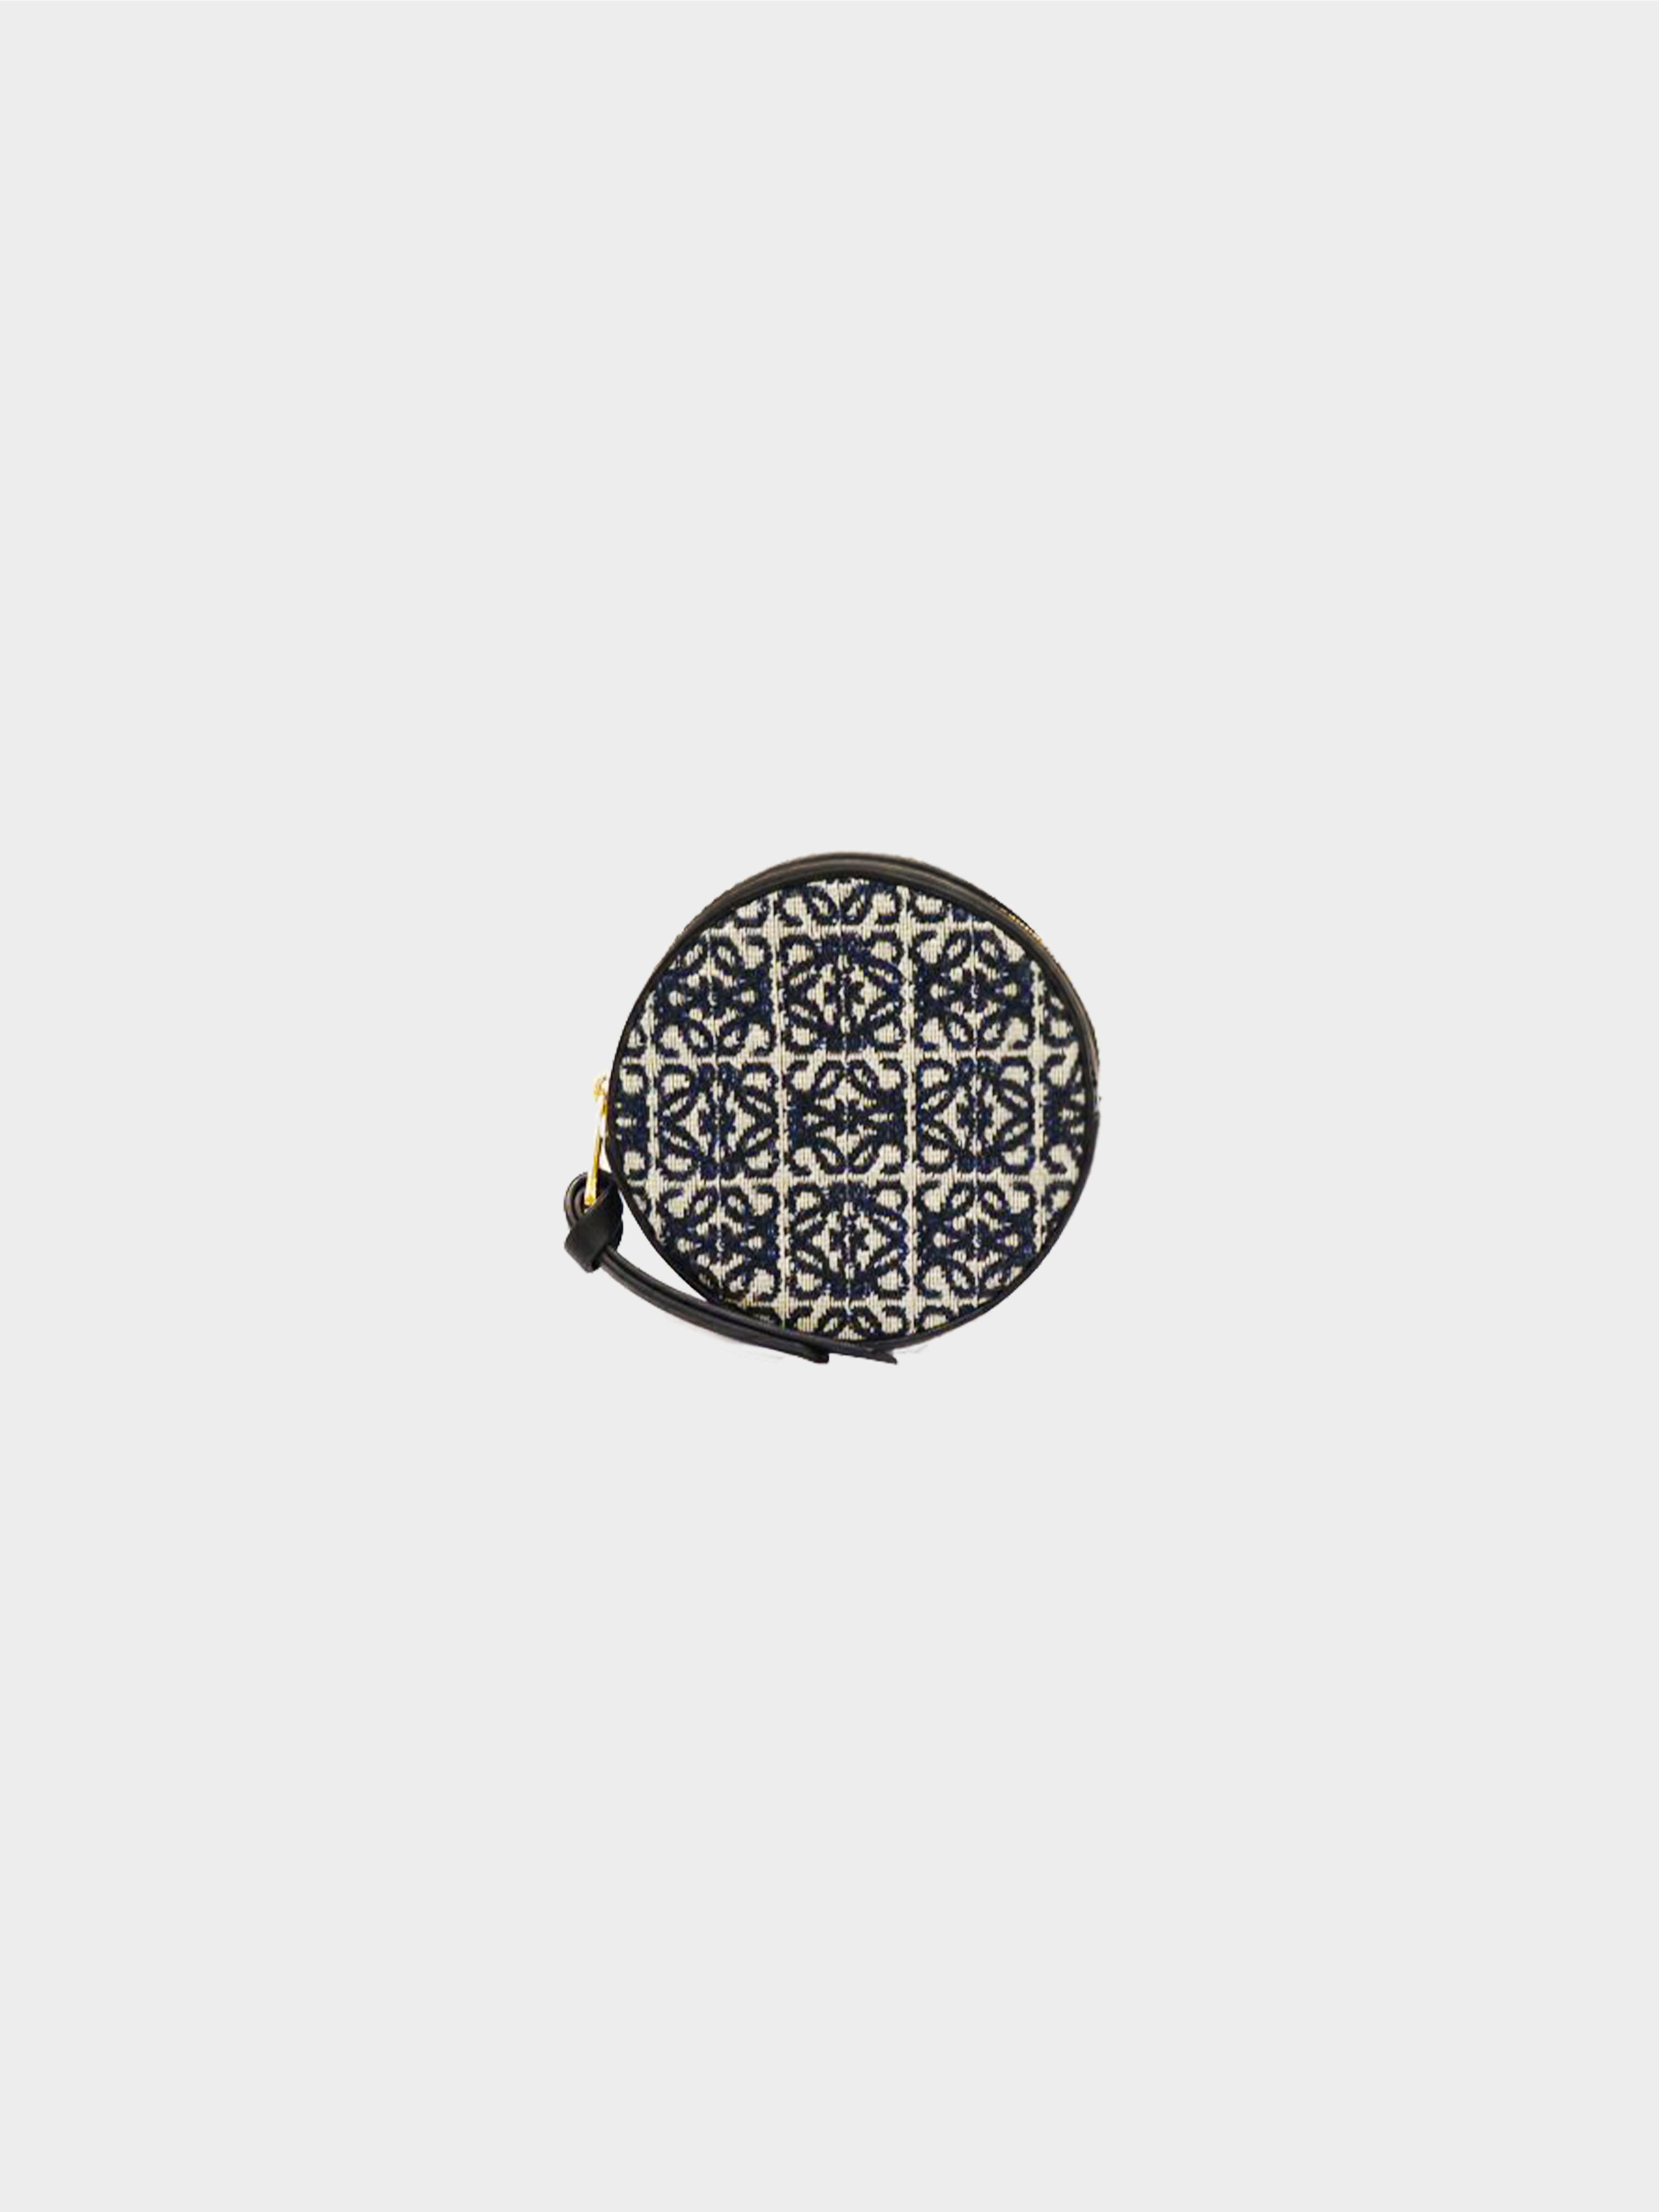 Anagram-embossed round coin purse, LOEWE